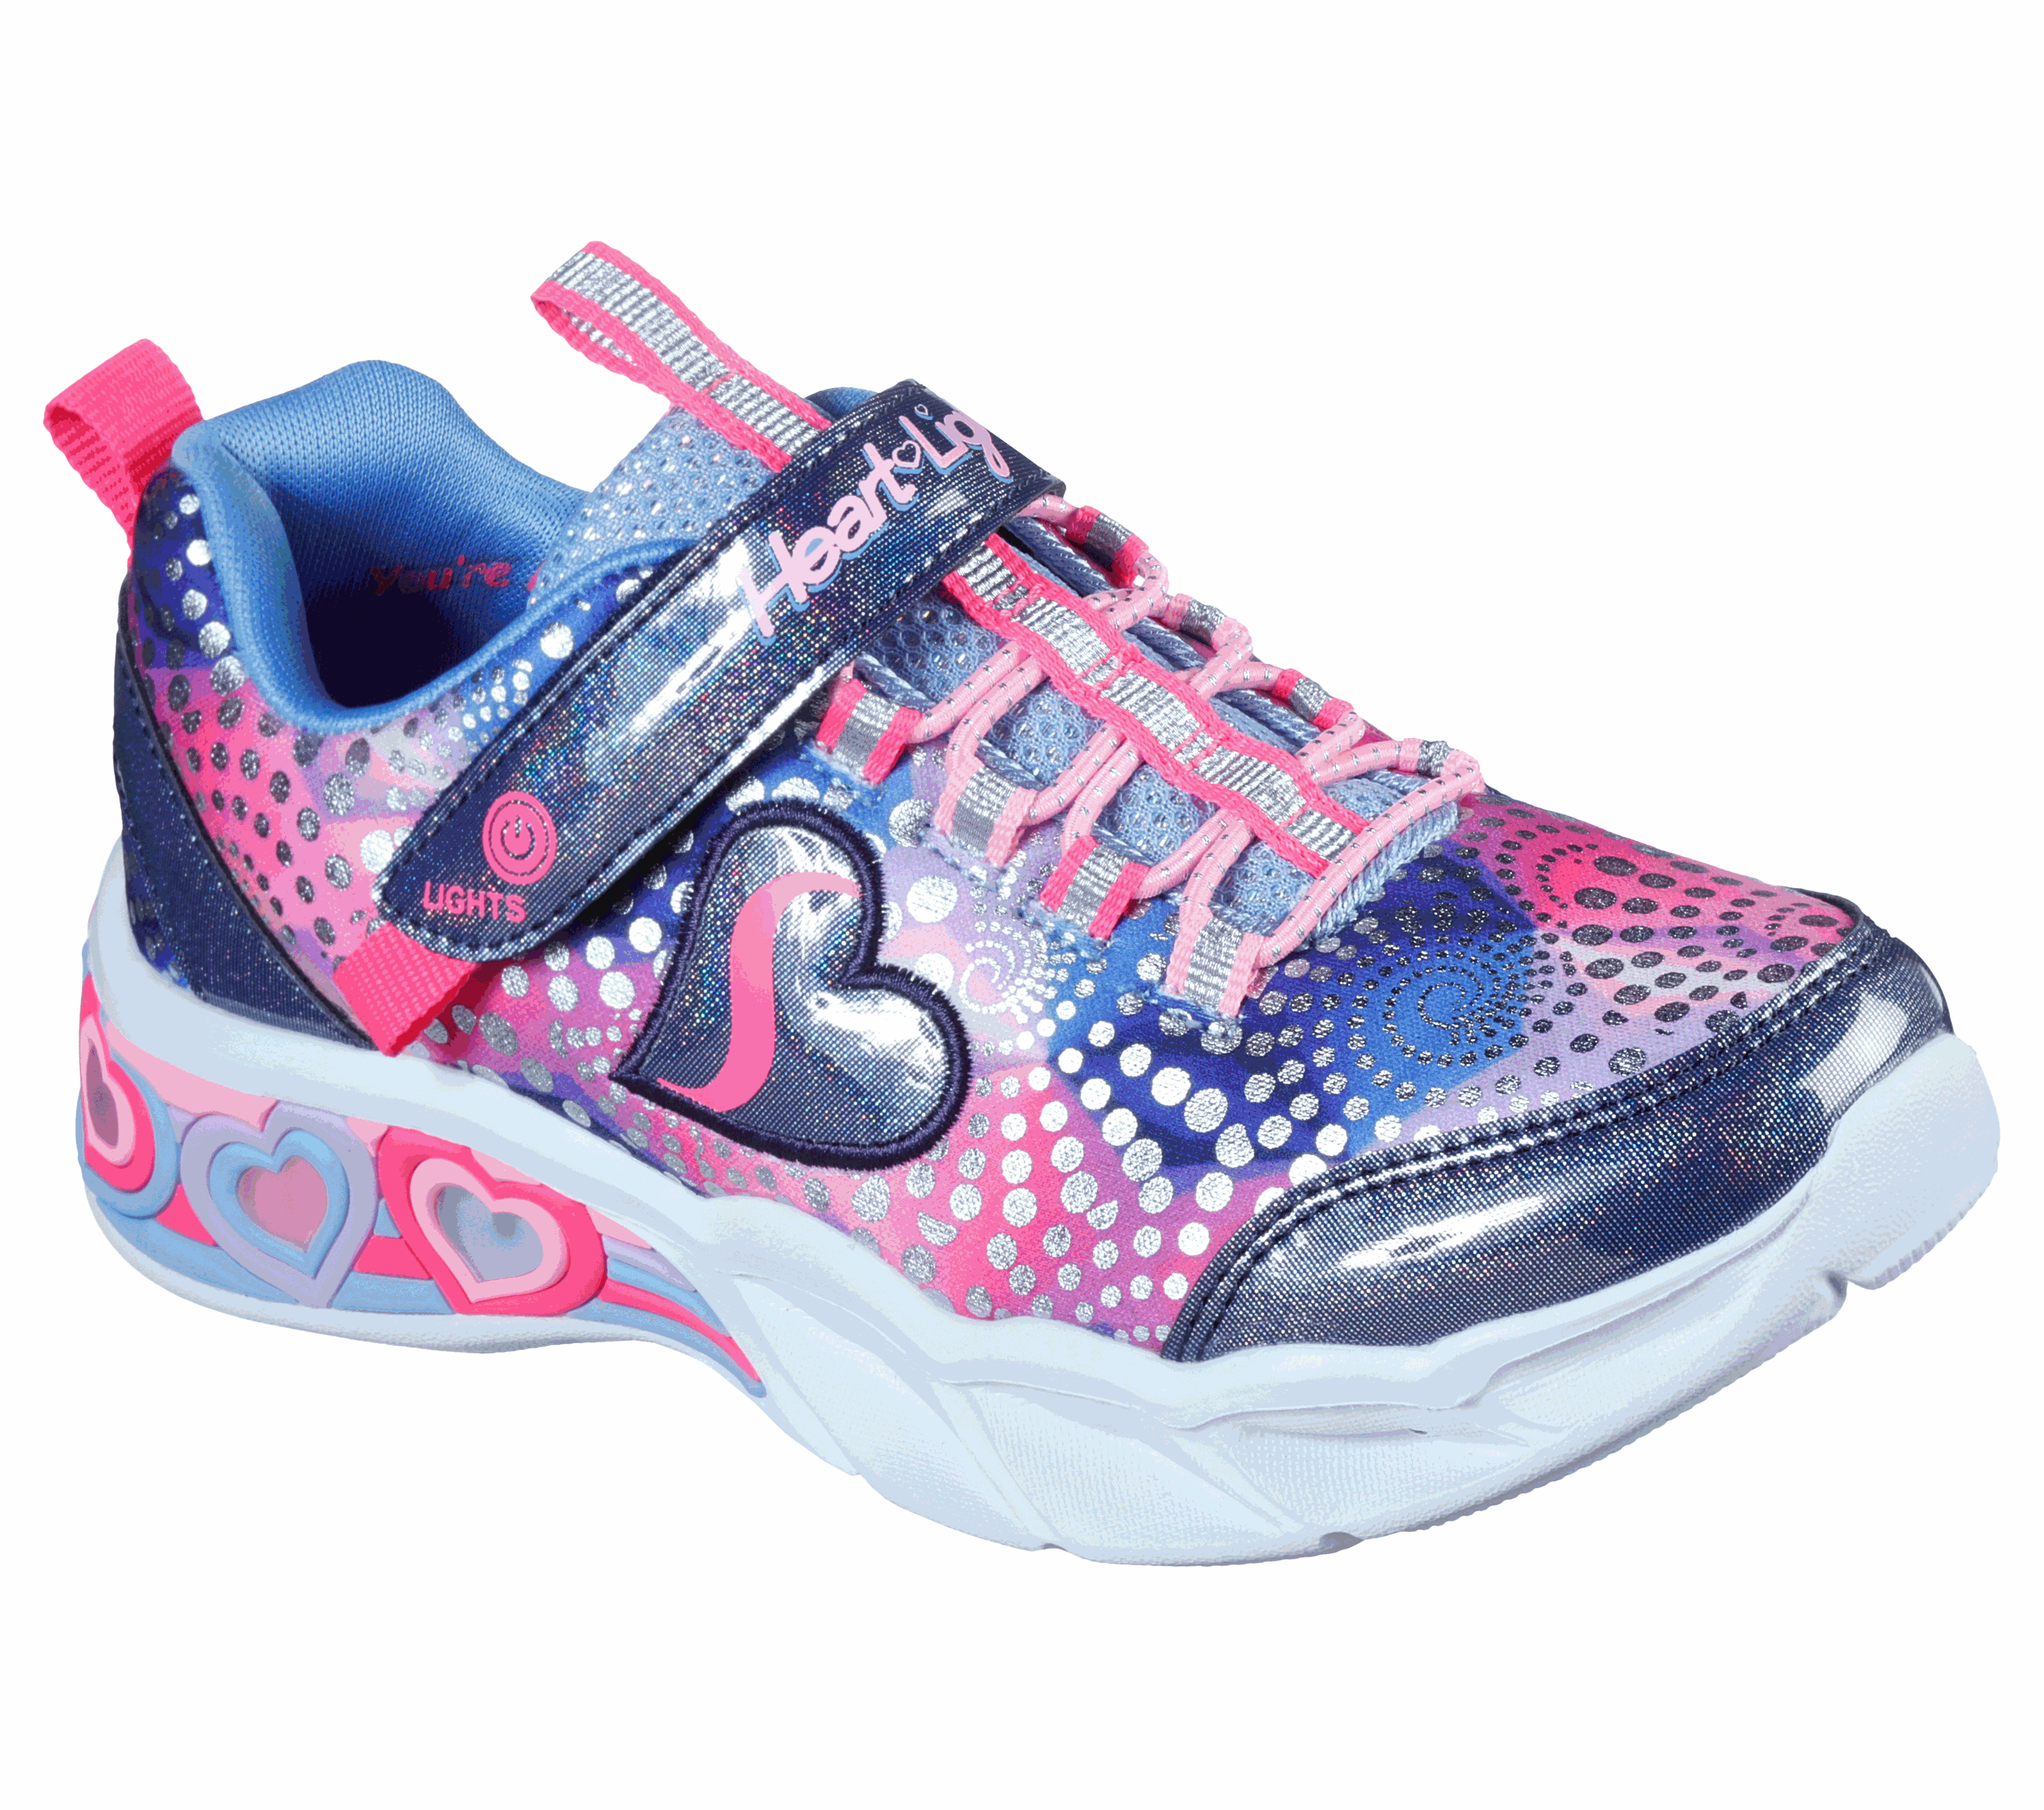 skechers light up shoes sale canada